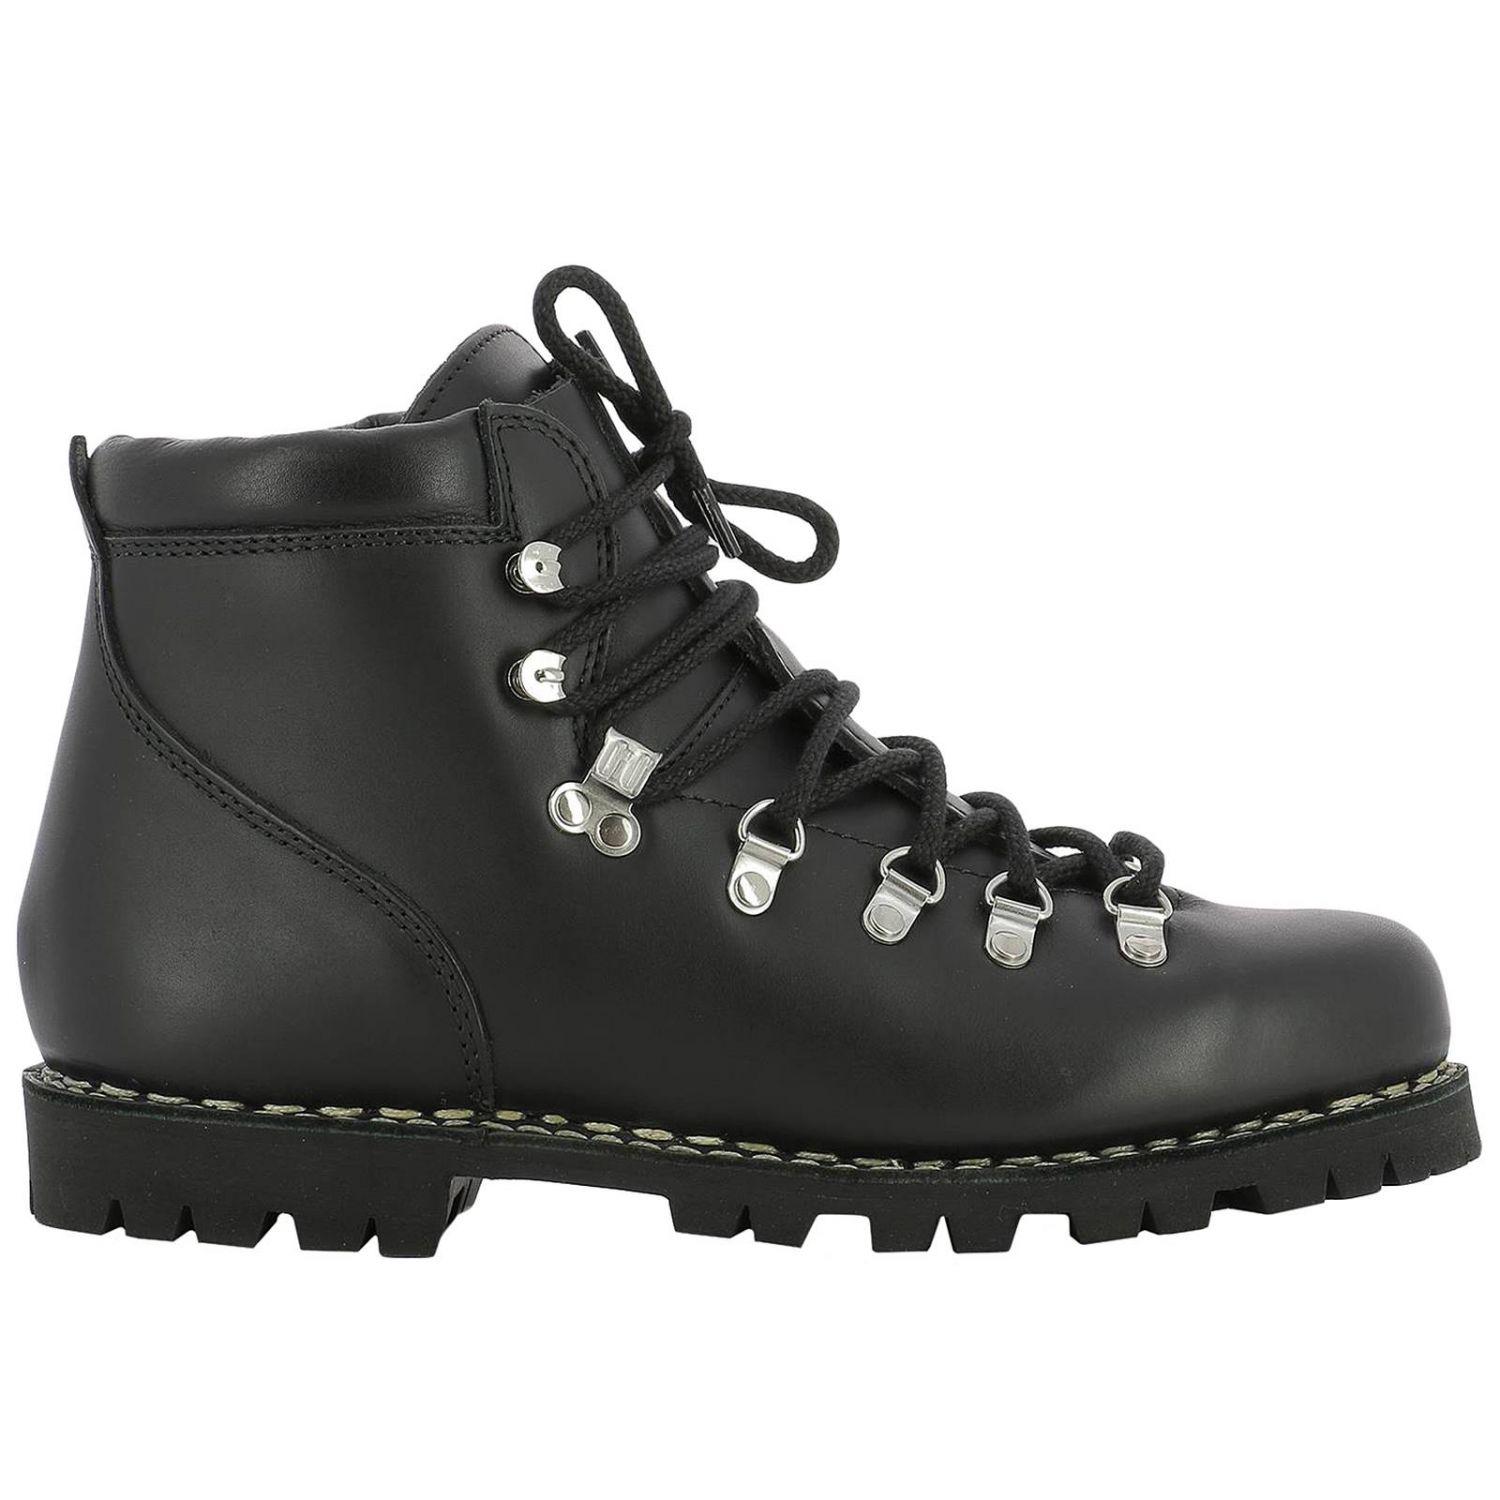 Paraboot Leather Avoriaz Hiking Boot in Black for Men - Lyst